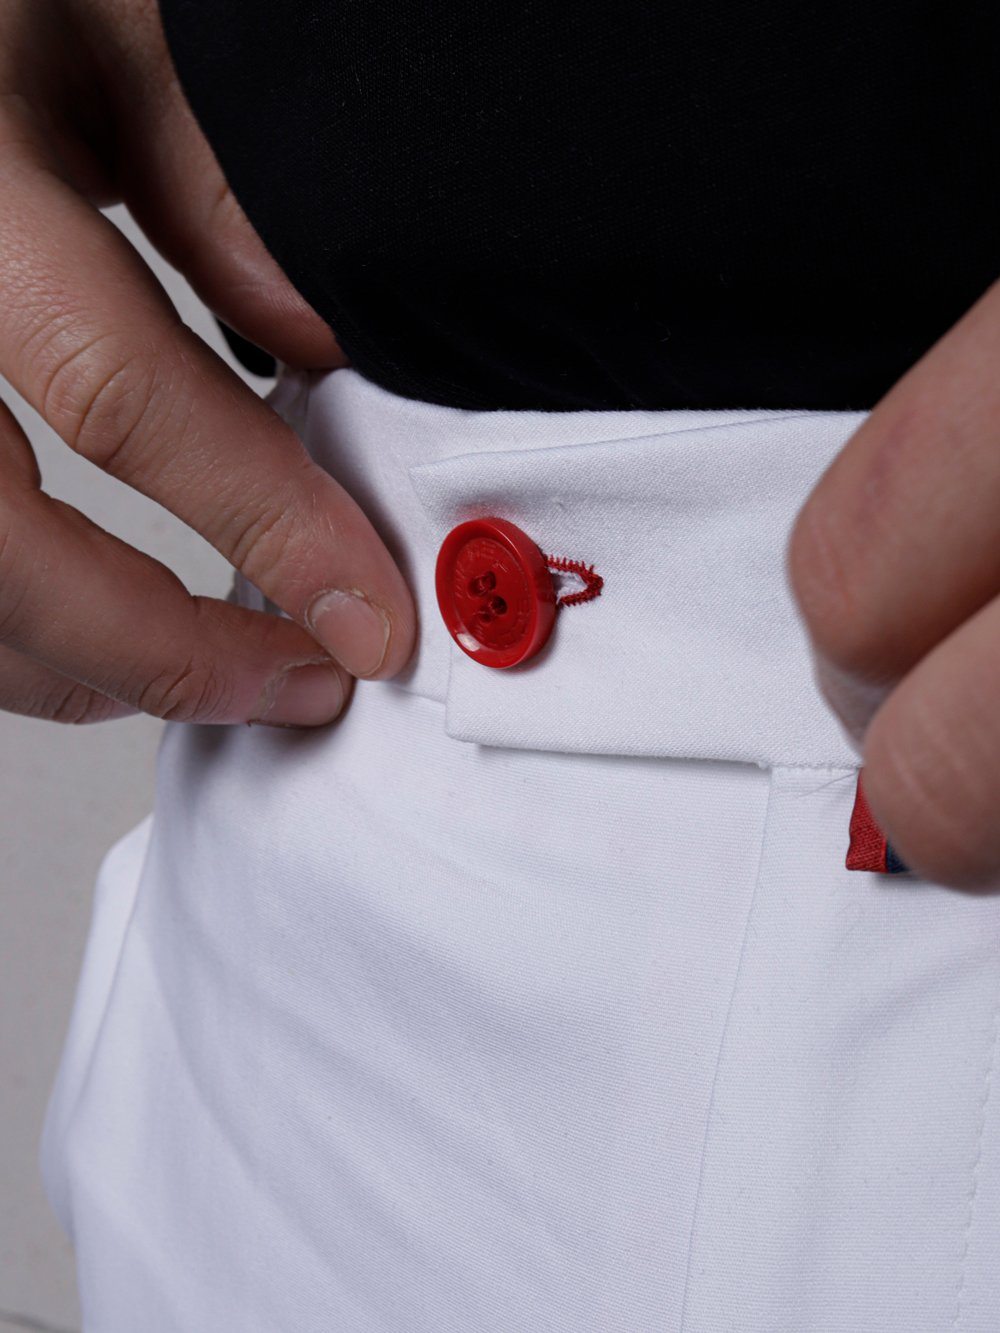 A man is putting a Cream Frappuccino button on his white pants.